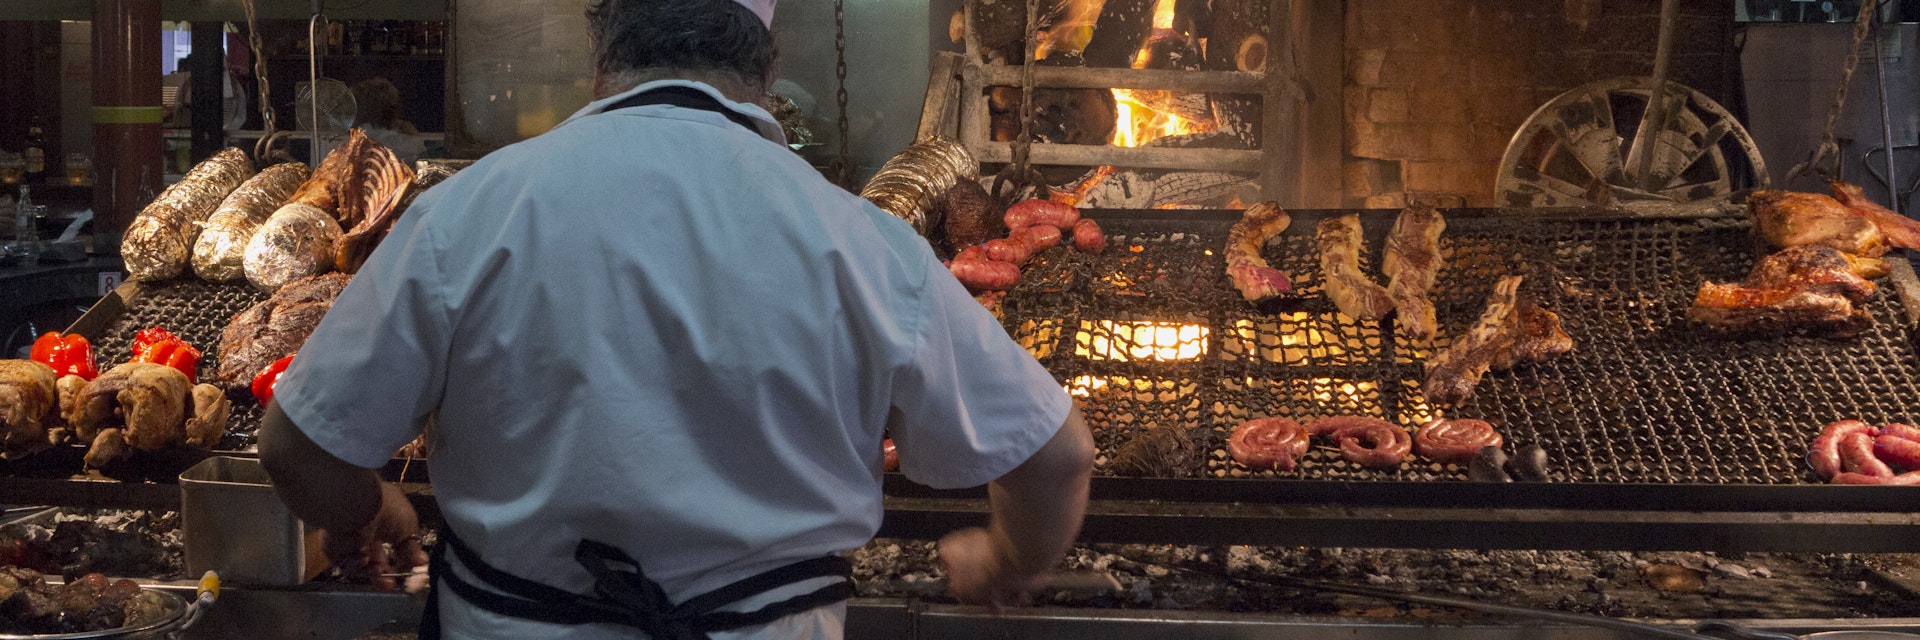 'Parilla' Barbeque Restaurant In The Mercado Del Puerto, Montevideo, Uruguay. (Photo by: Julio Etchart/Majority World/Universal Images Group via Getty Images)